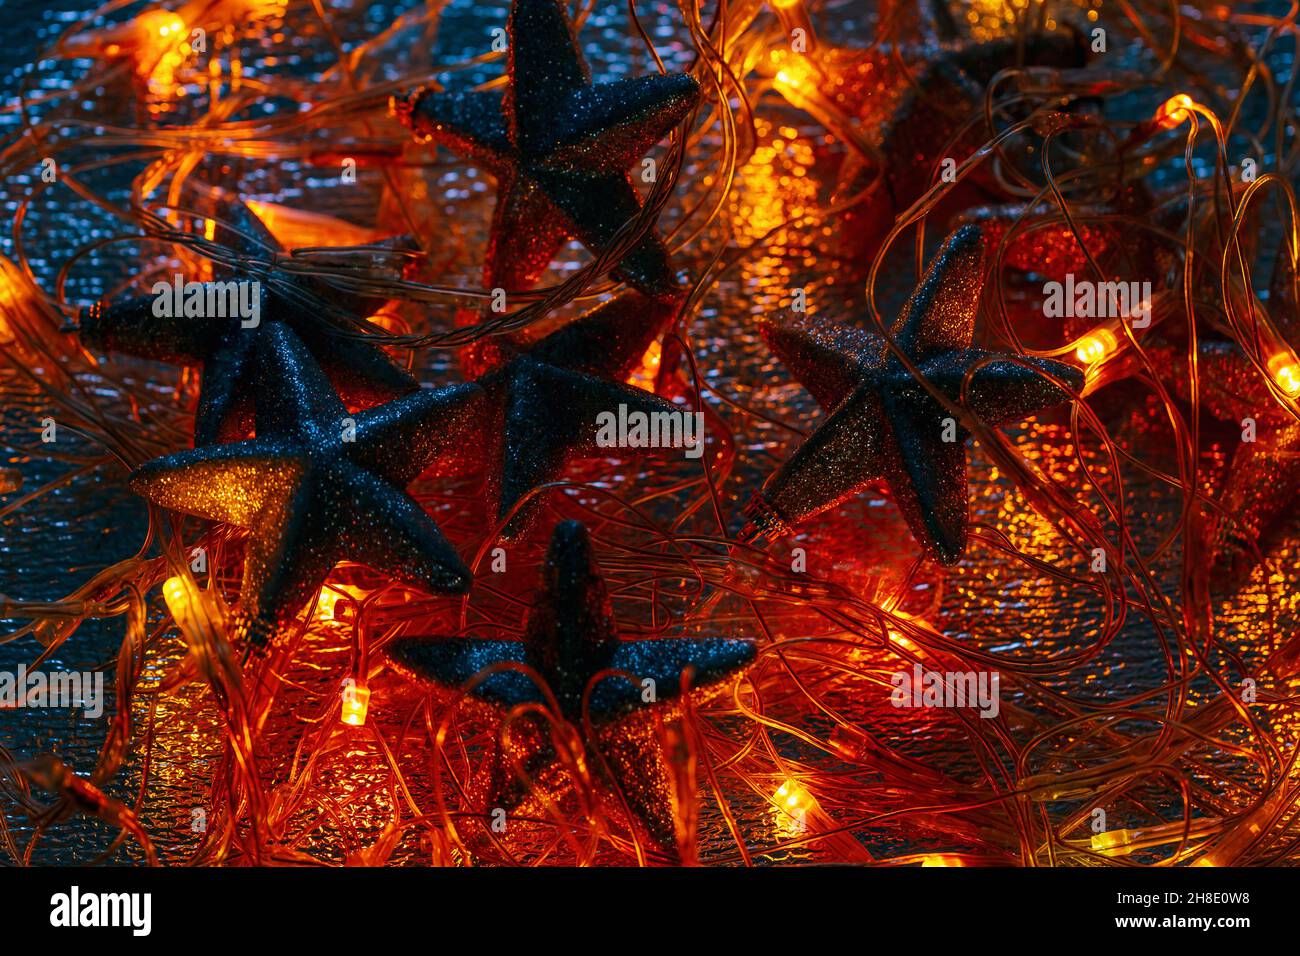 Abstract dark magic Christmas background with garland and stars Stock Photo